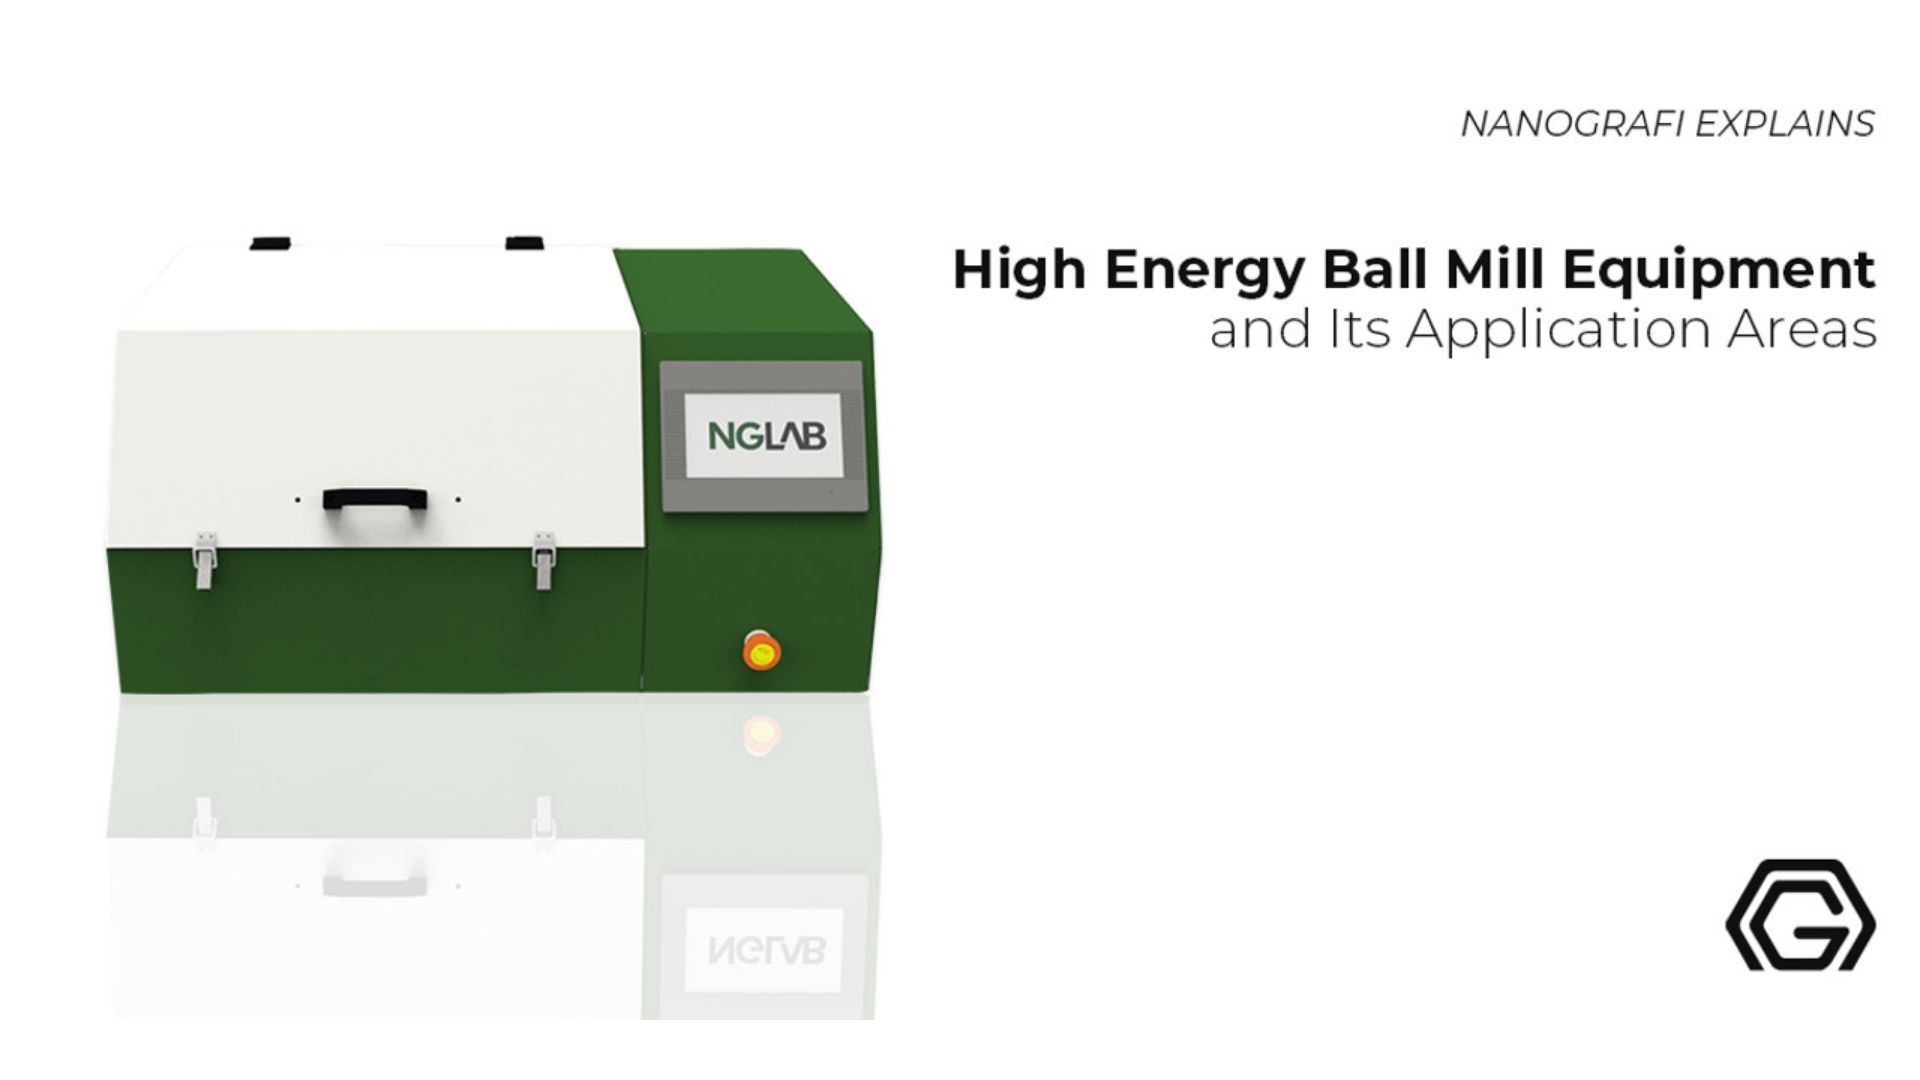 High energy ball mill equipment and its application areas